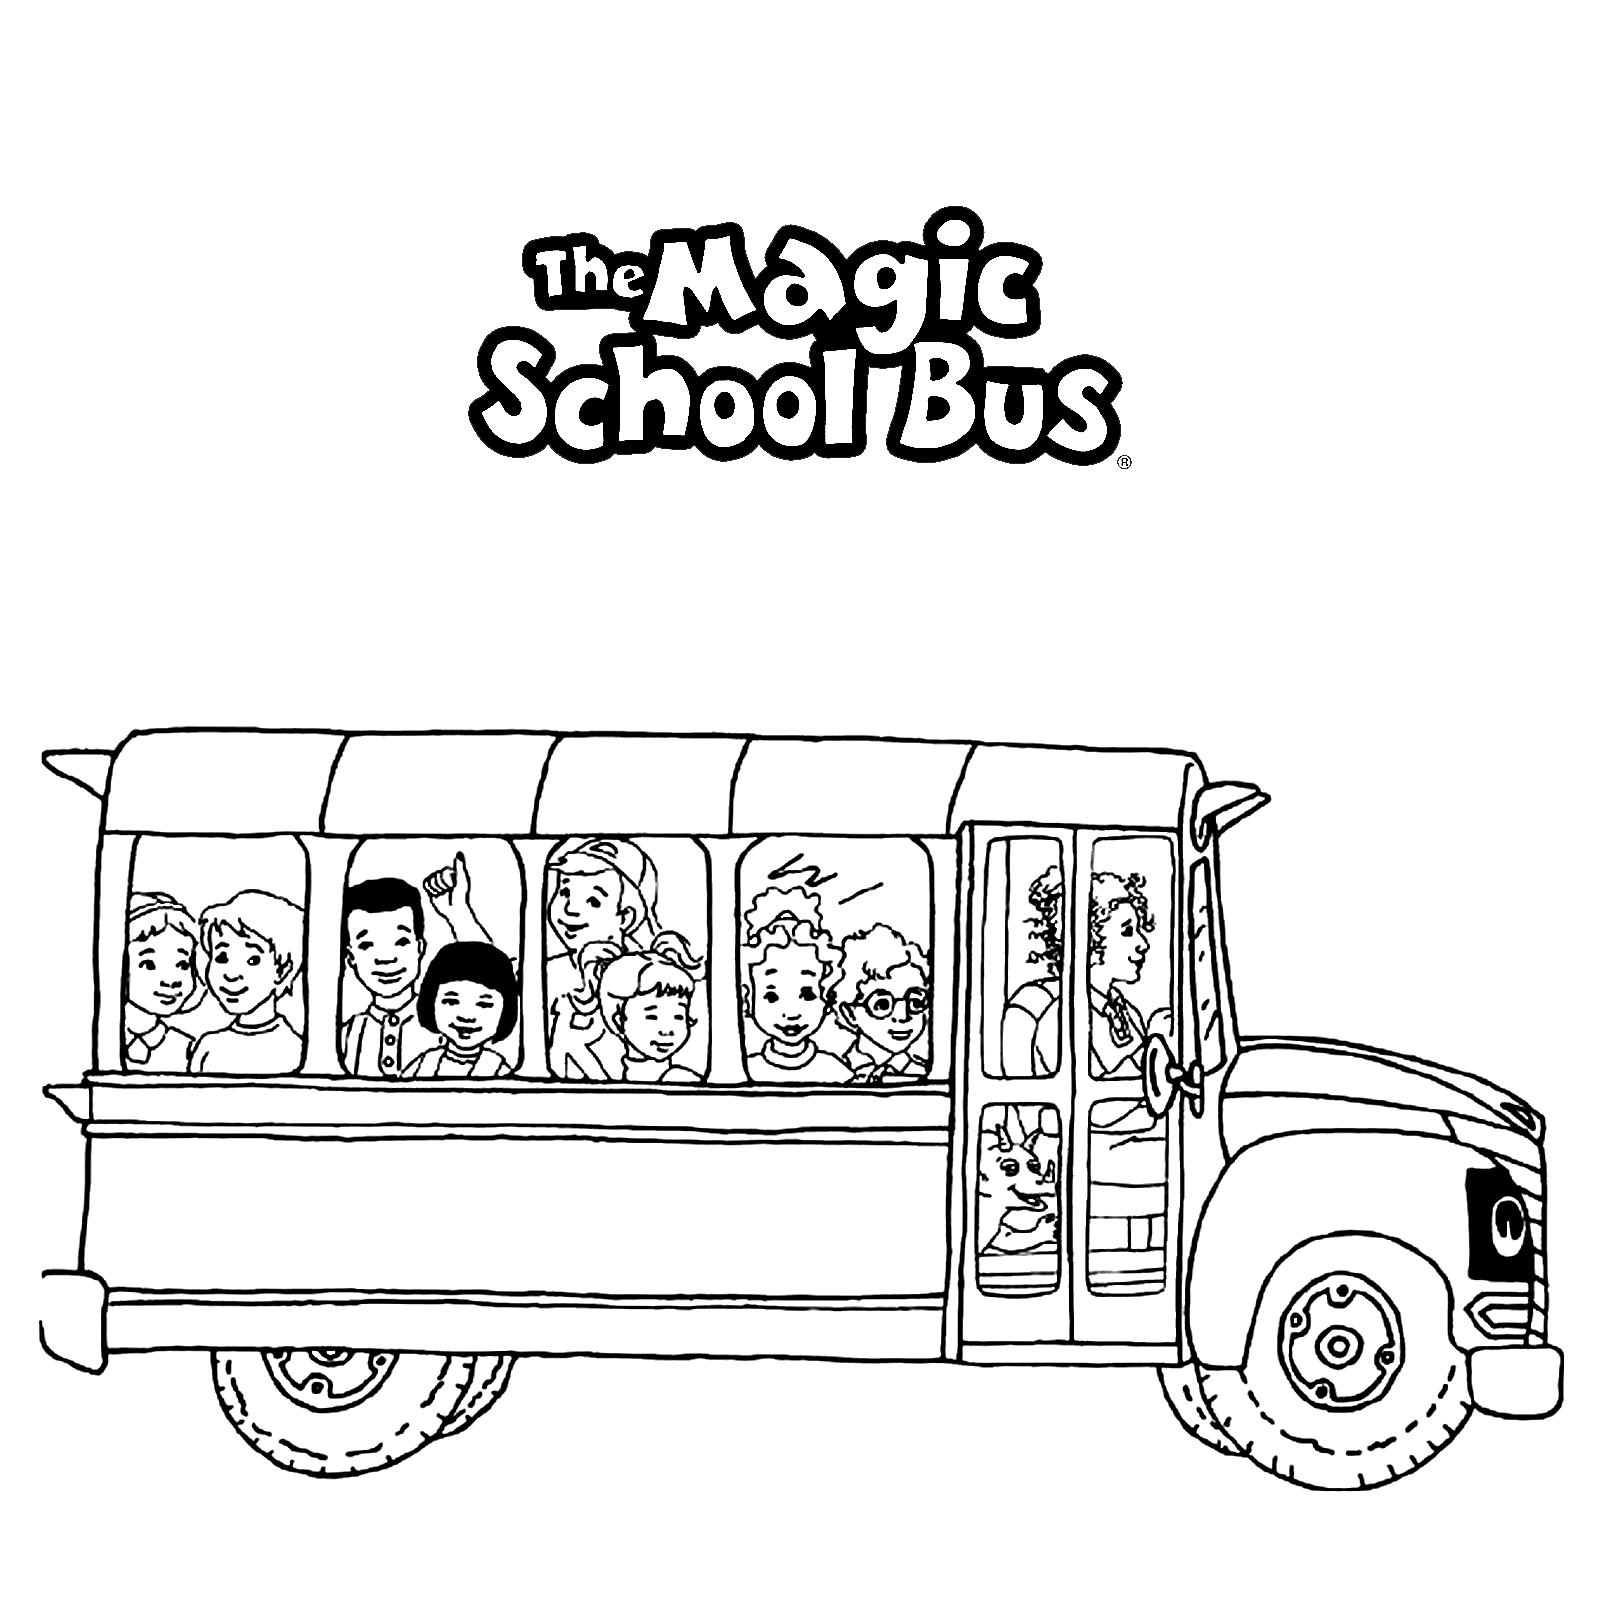 Ms Frizzles Class On The Magic School Bus Coloring Page